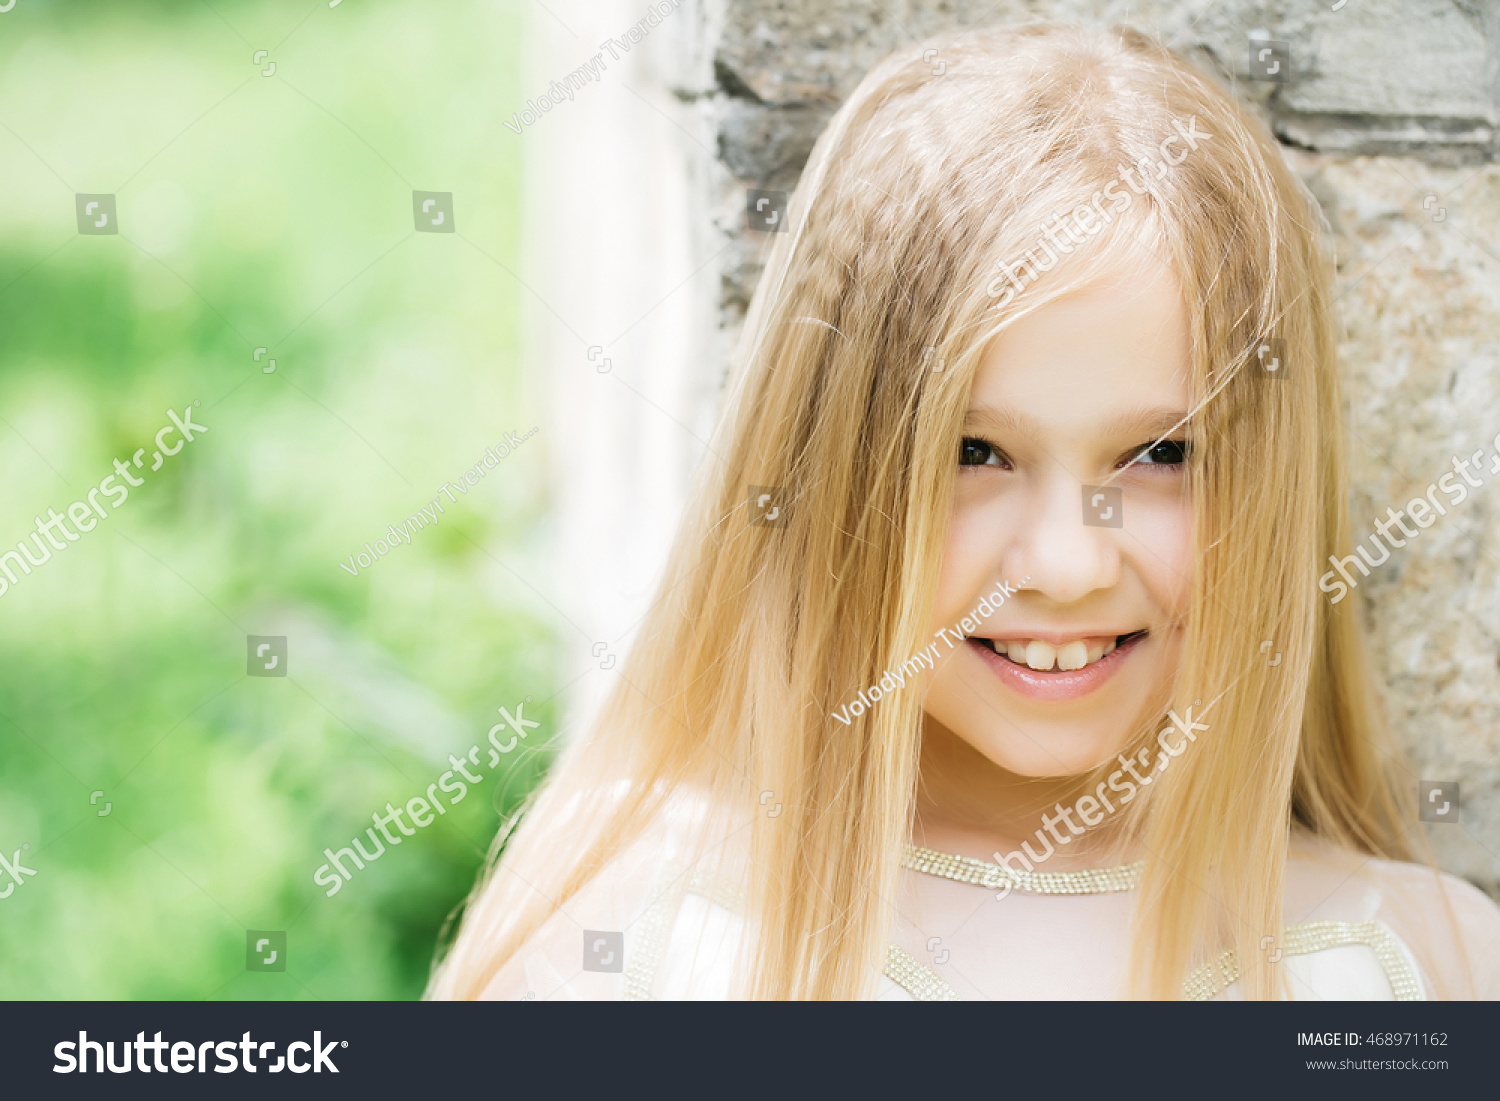 Small Girl Kid Long Blonde Hair Stock Photo Edit Now 468971162